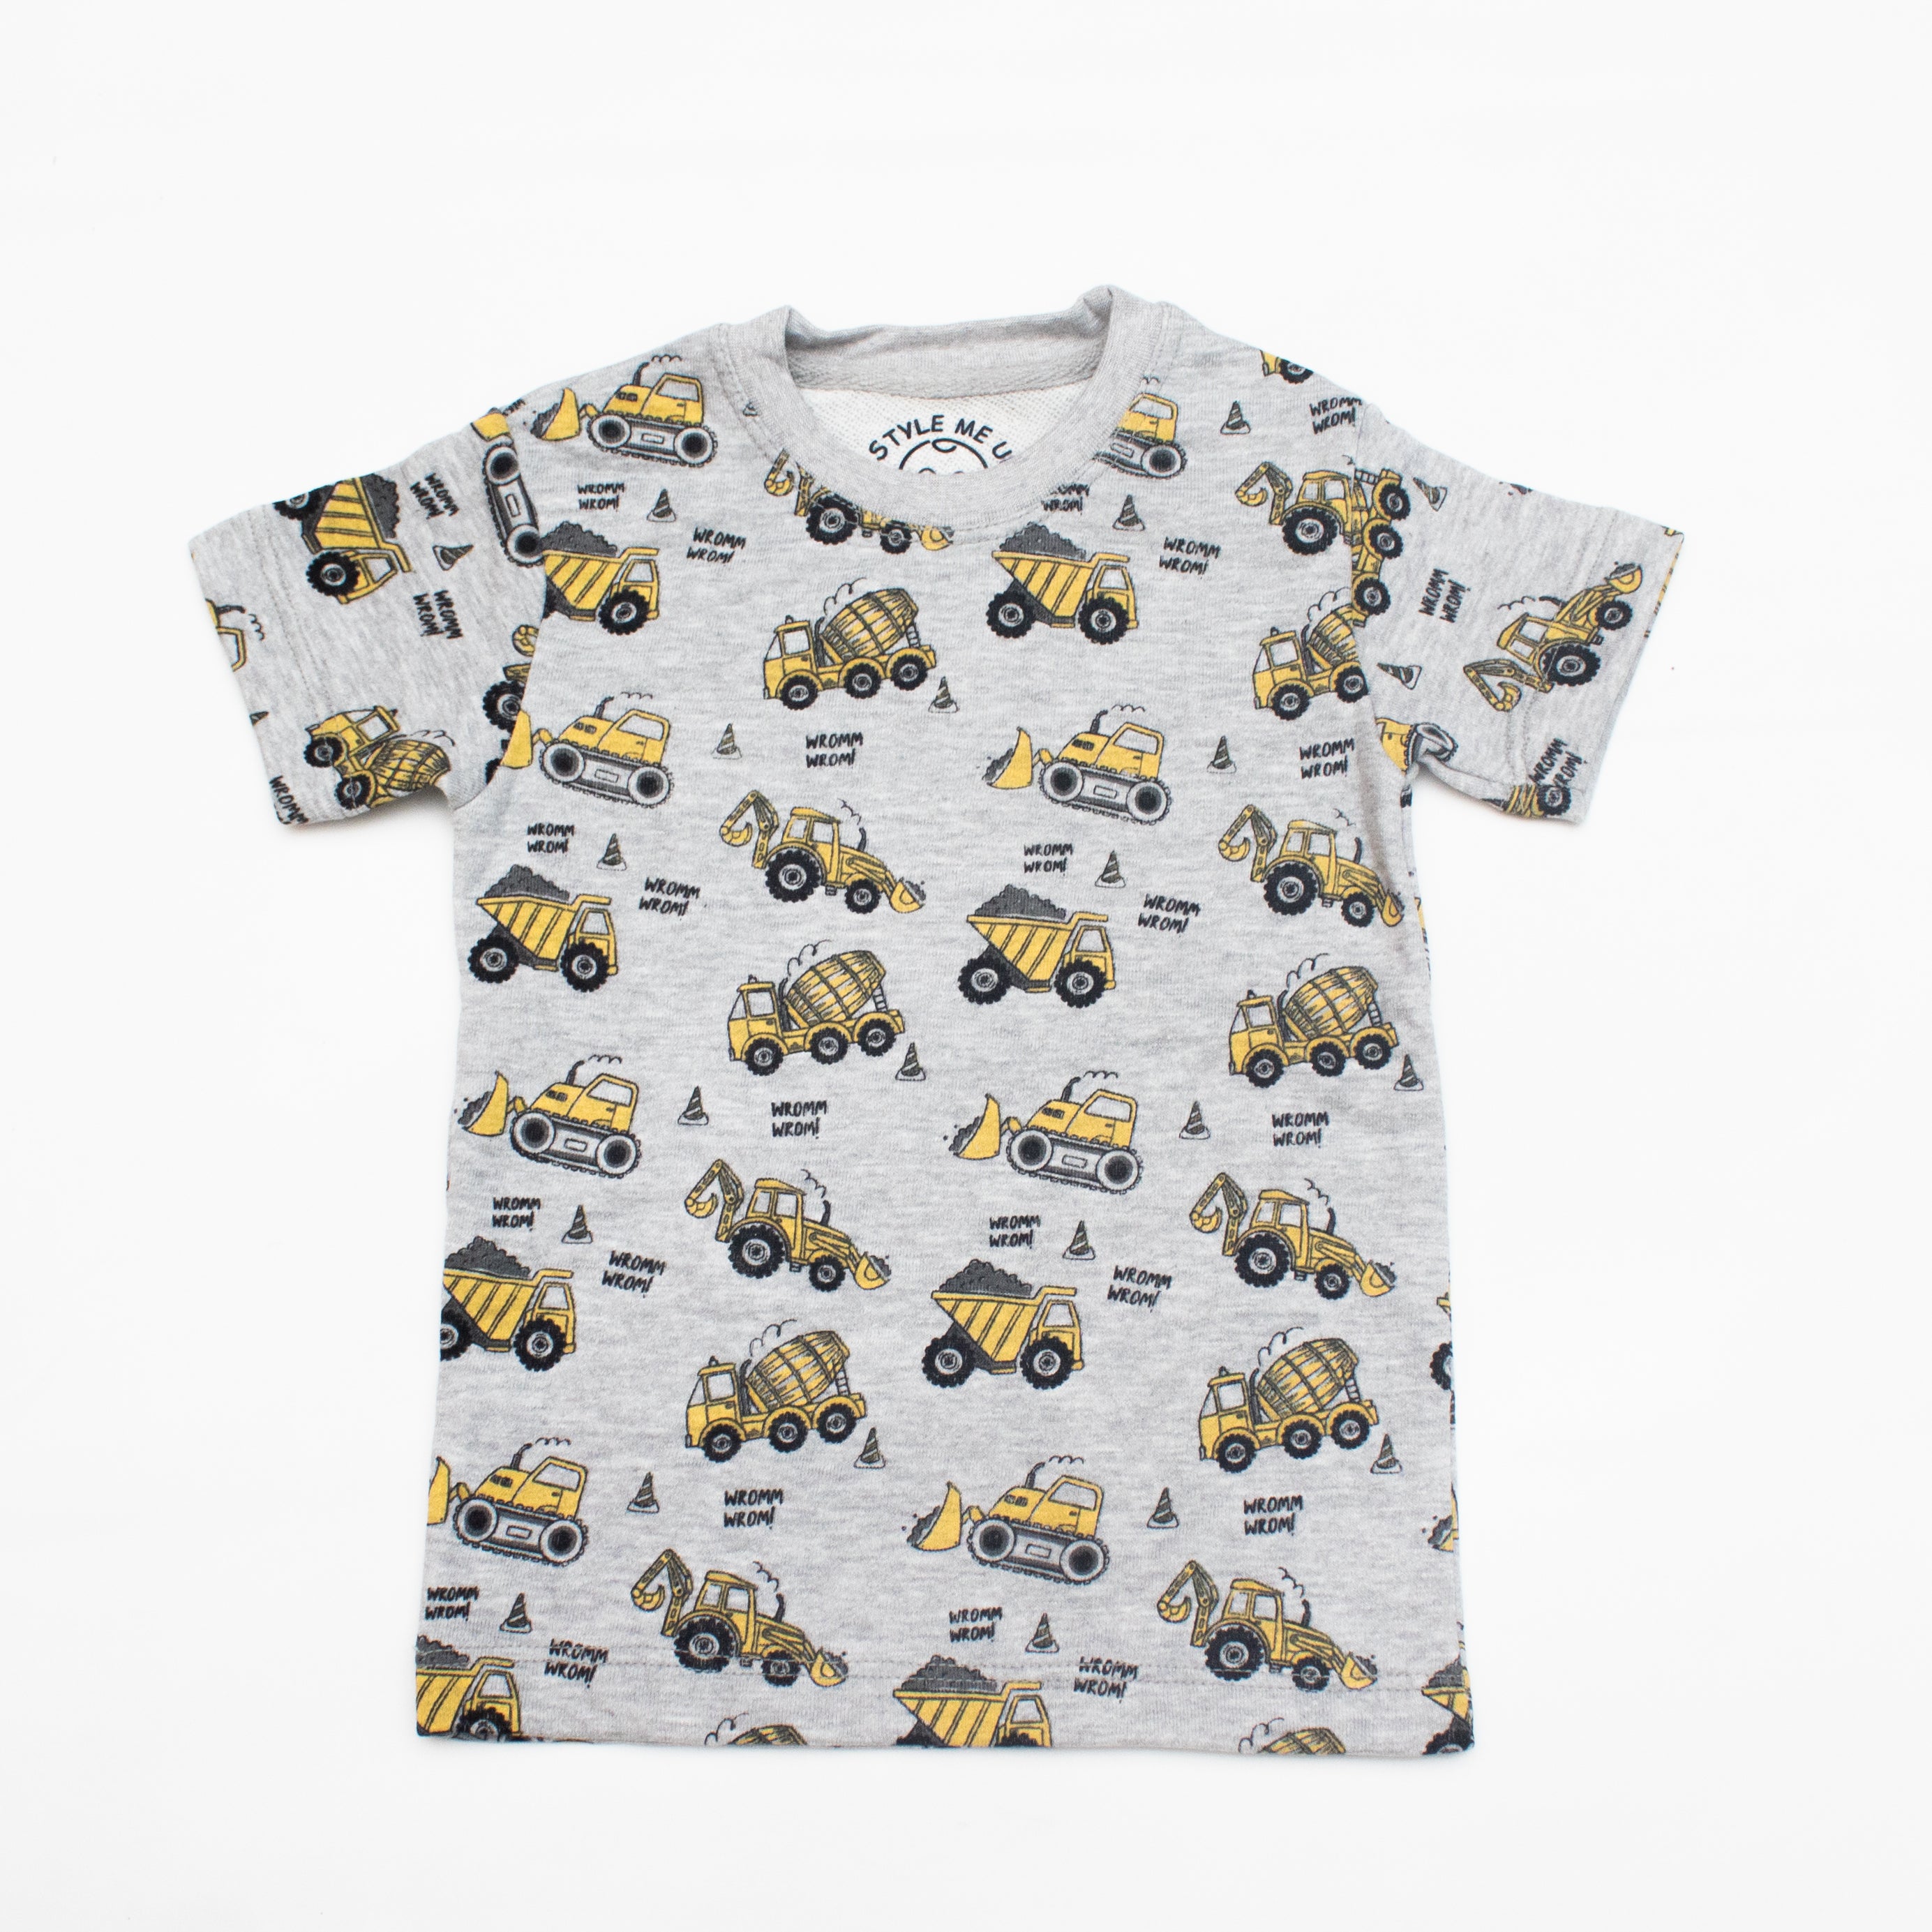 Grey Boys Truck T-Shirt And Shorts For Kids